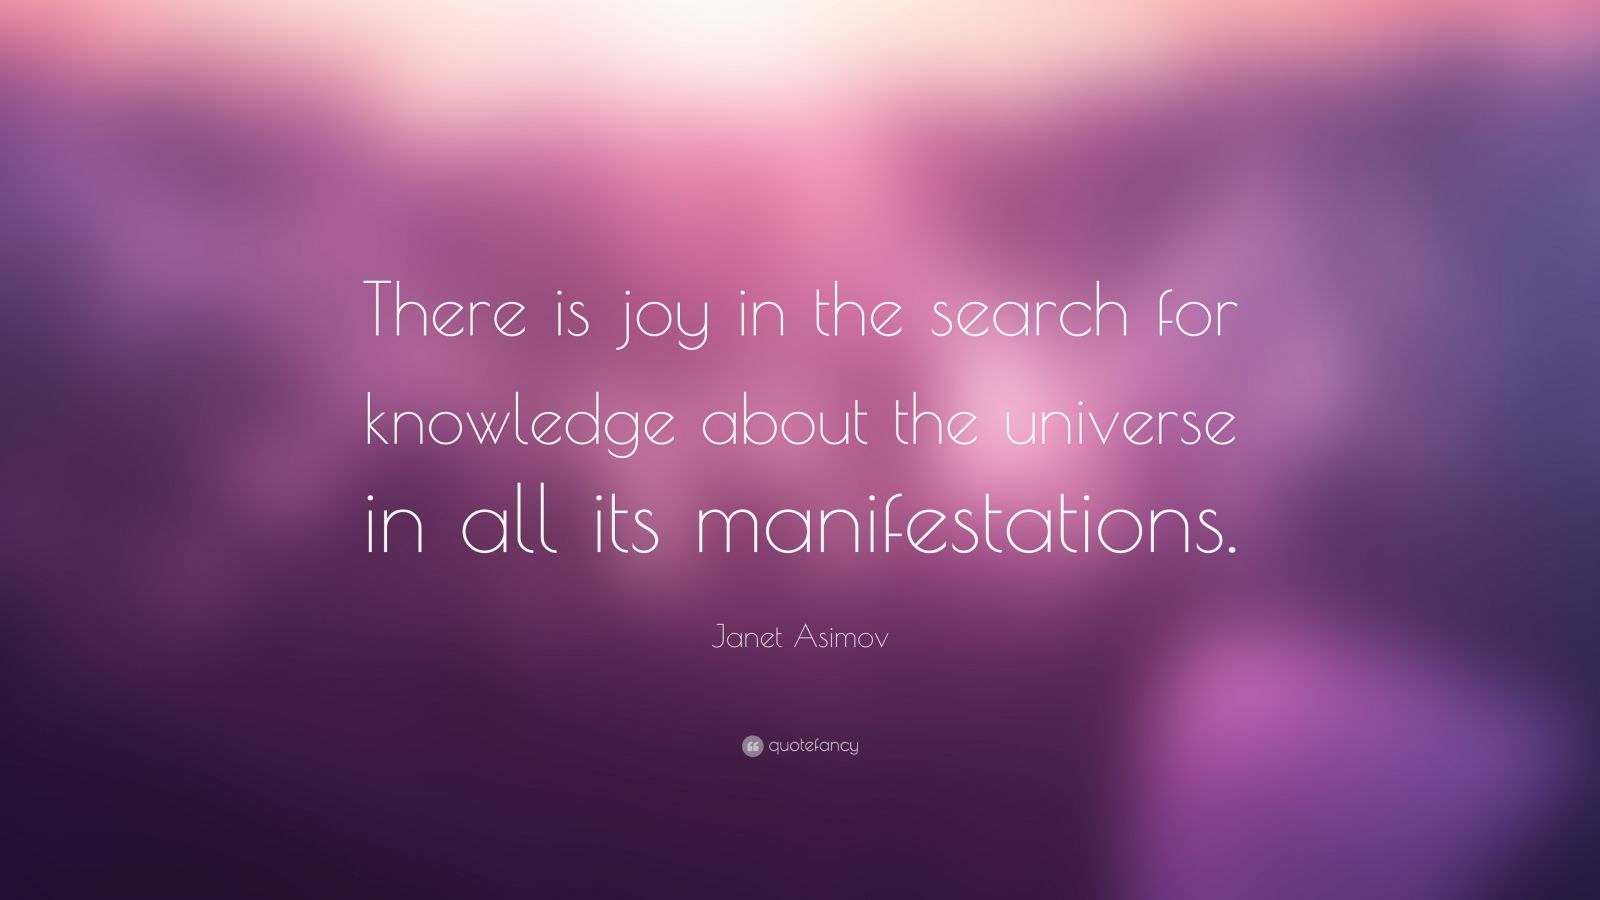 Janet Asimov Quote: “There is joy in the search for knowledge about the ...